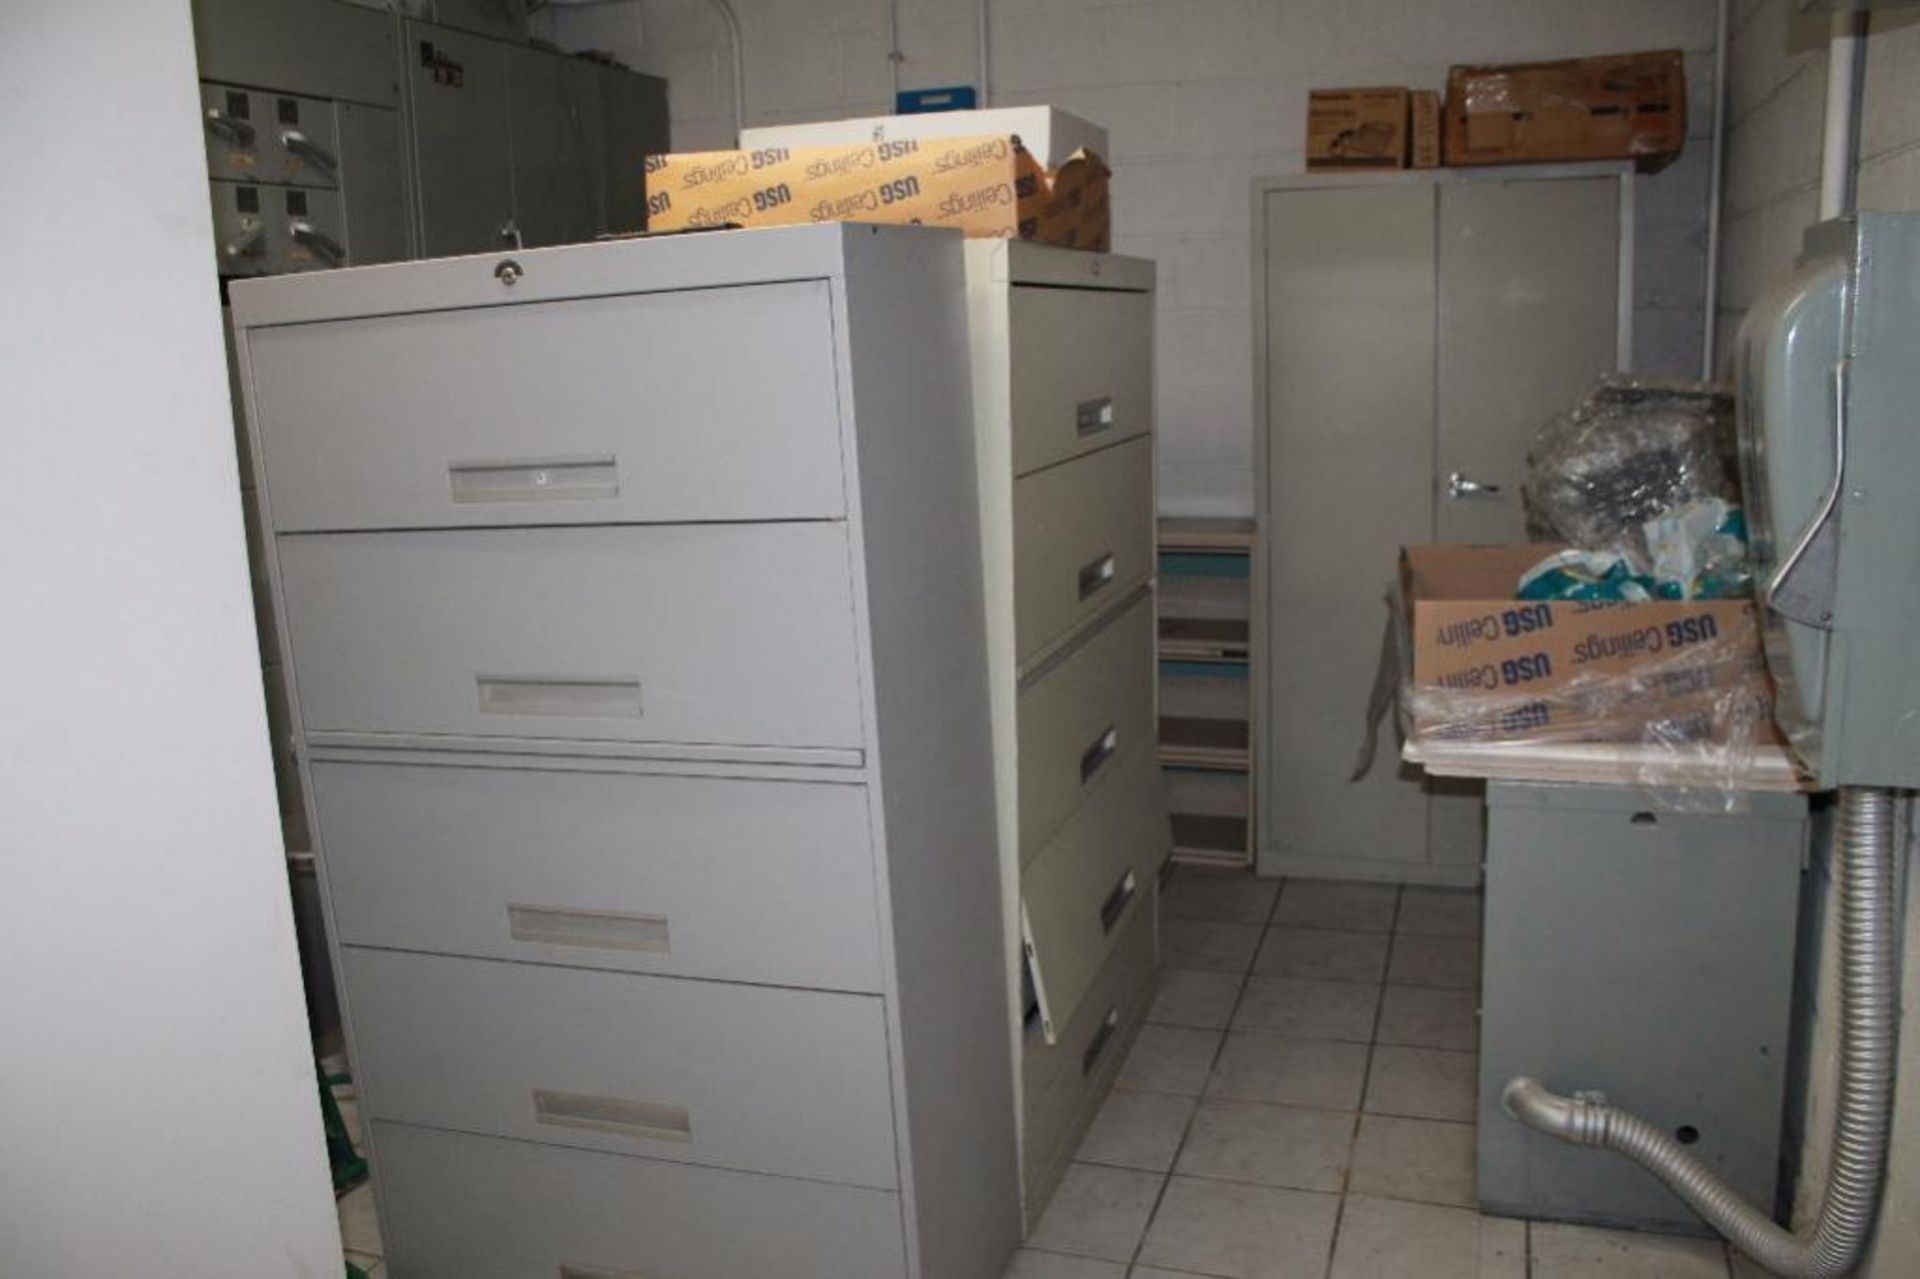 Filing Cabinets and Contents (Two Locations)